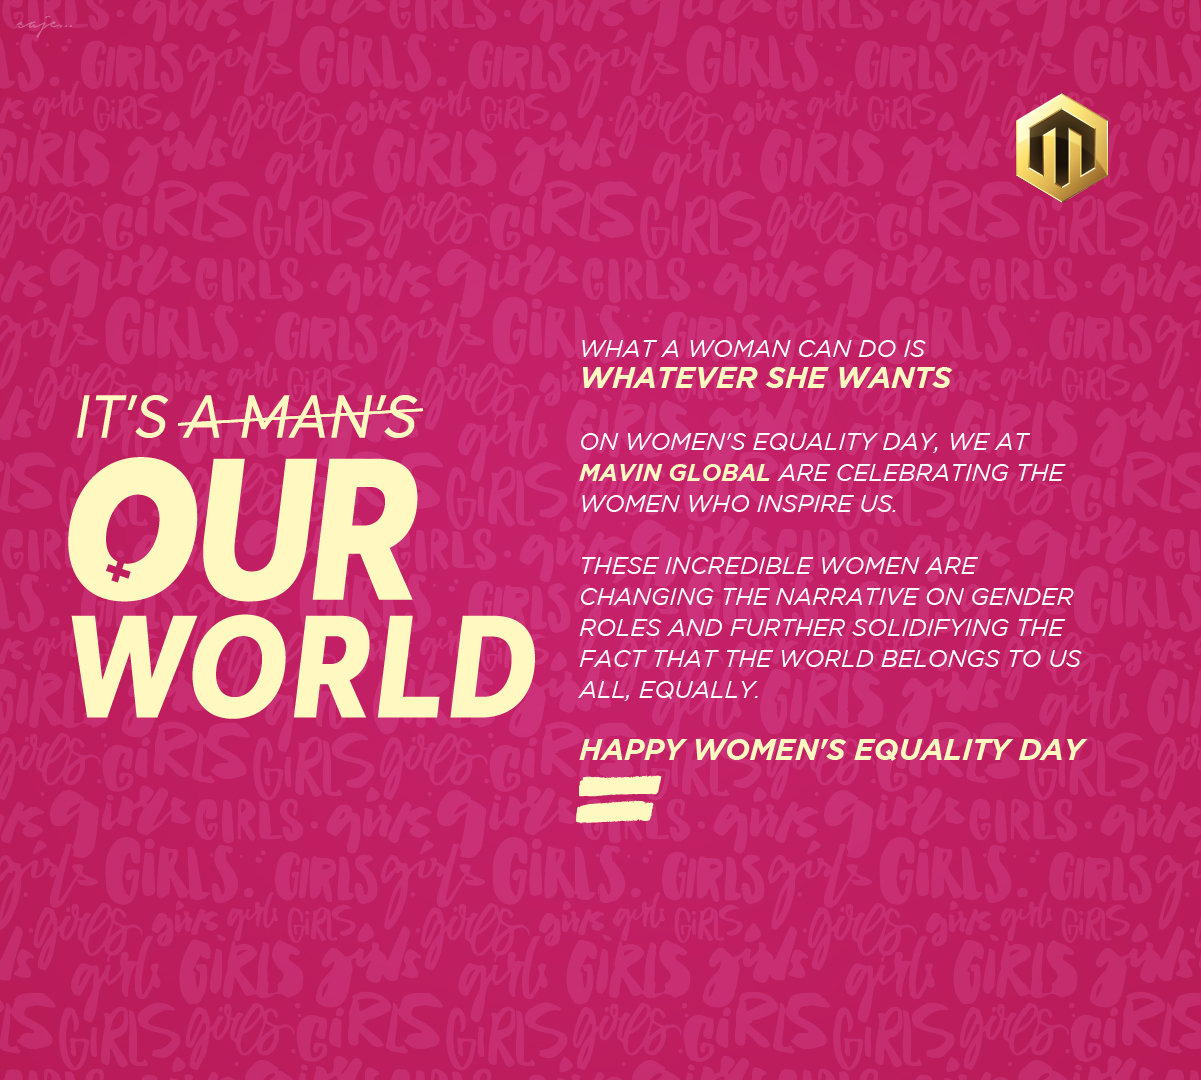 Mavin Global Create ‘It’s Our World’ Campaign to Commemorate Women’s Equality Day